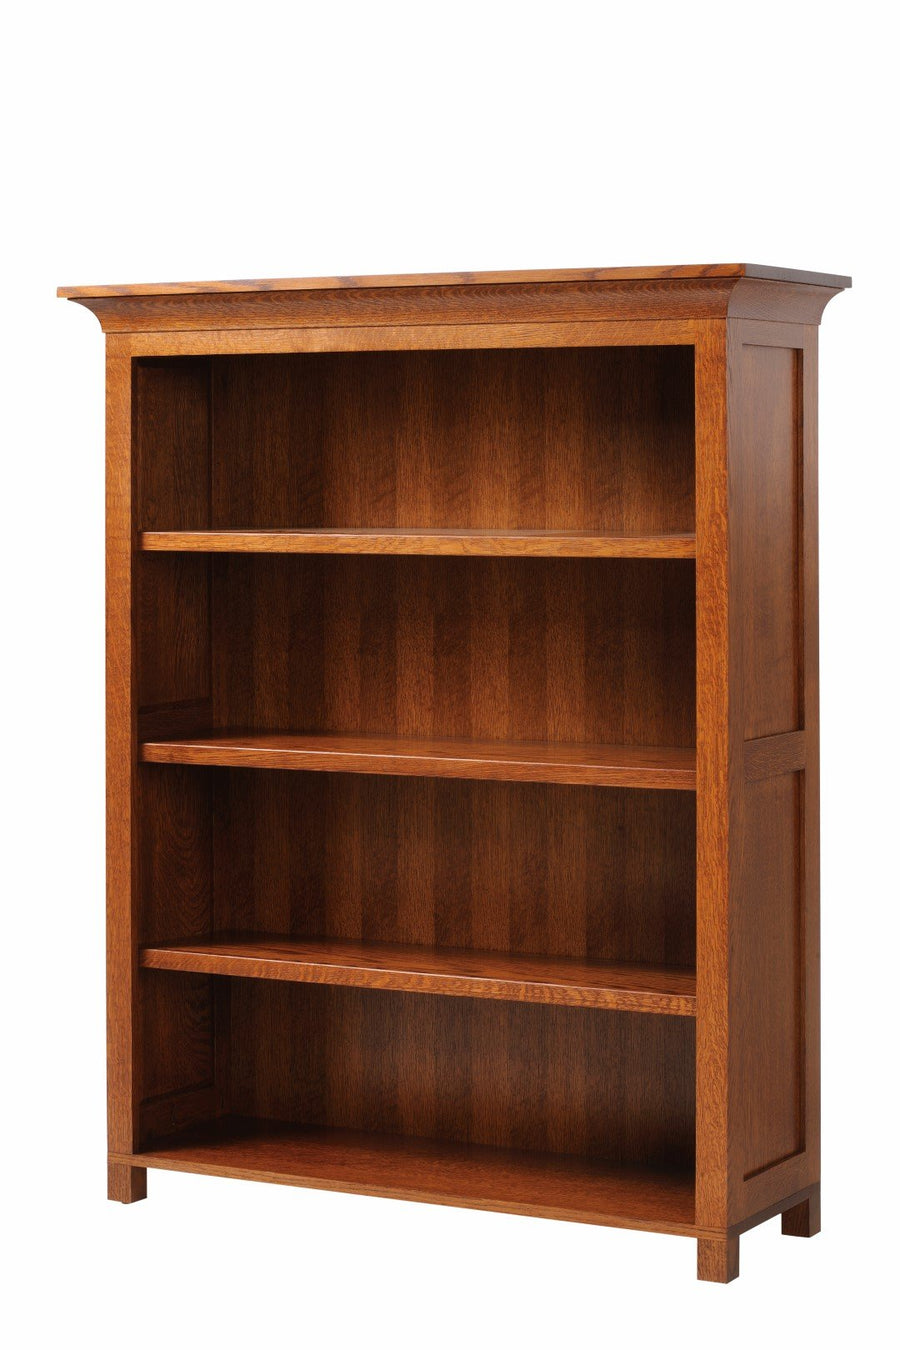 Coventry Amish Bookcase - Foothills Amish Furniture